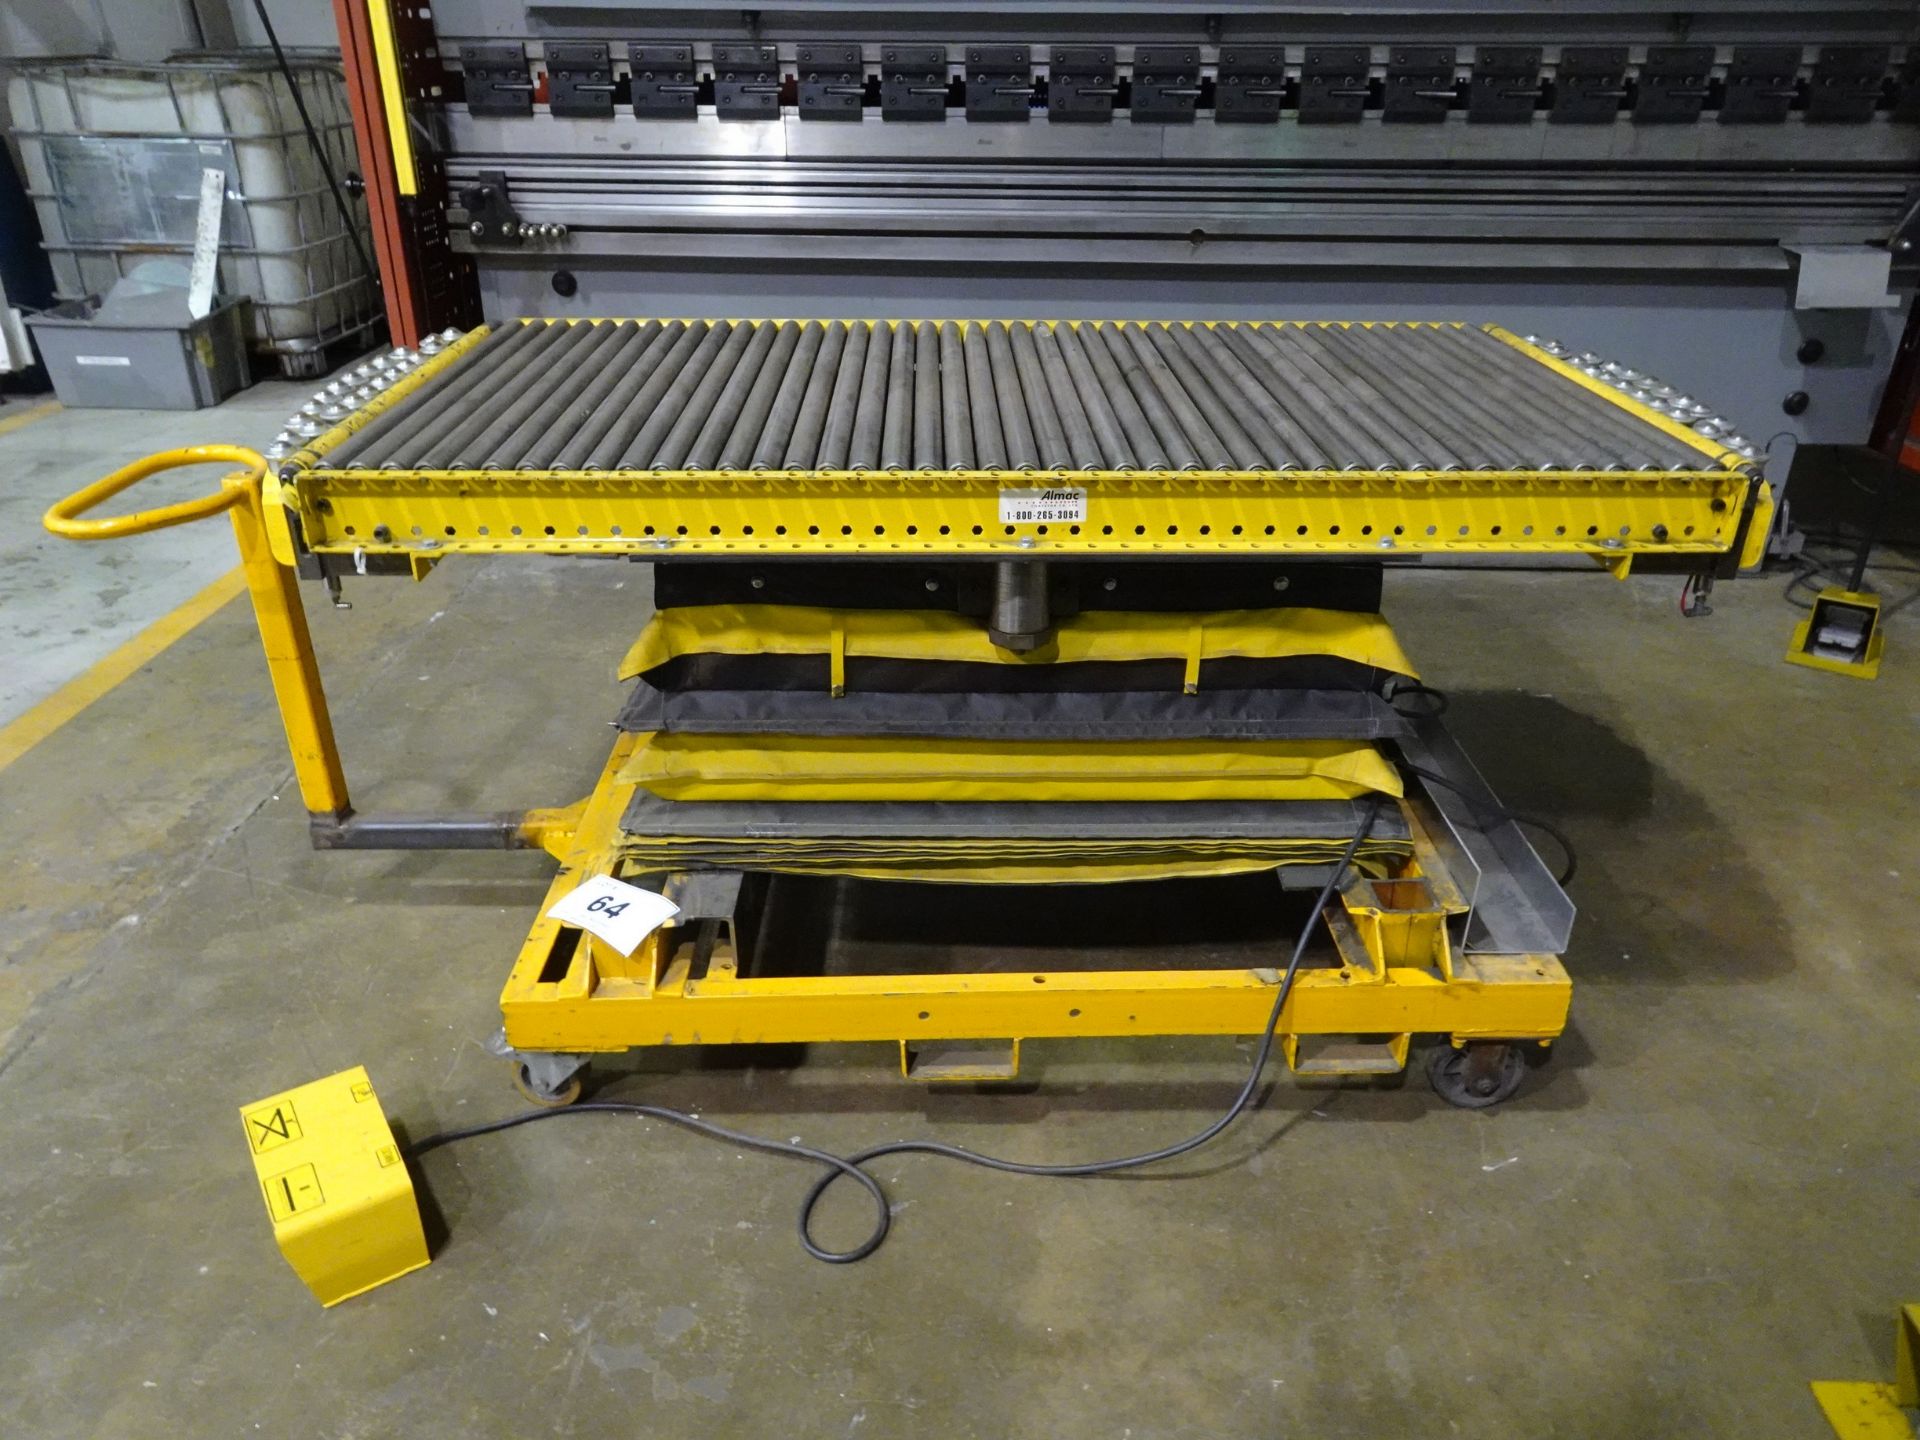 2010 ALMCA 2000 LBS CAPACITY ROLLER TOP CONVEYOR ELECTRIC SCISSOR LIFT, MOUNTED ON CART, ROTARY - Image 2 of 8